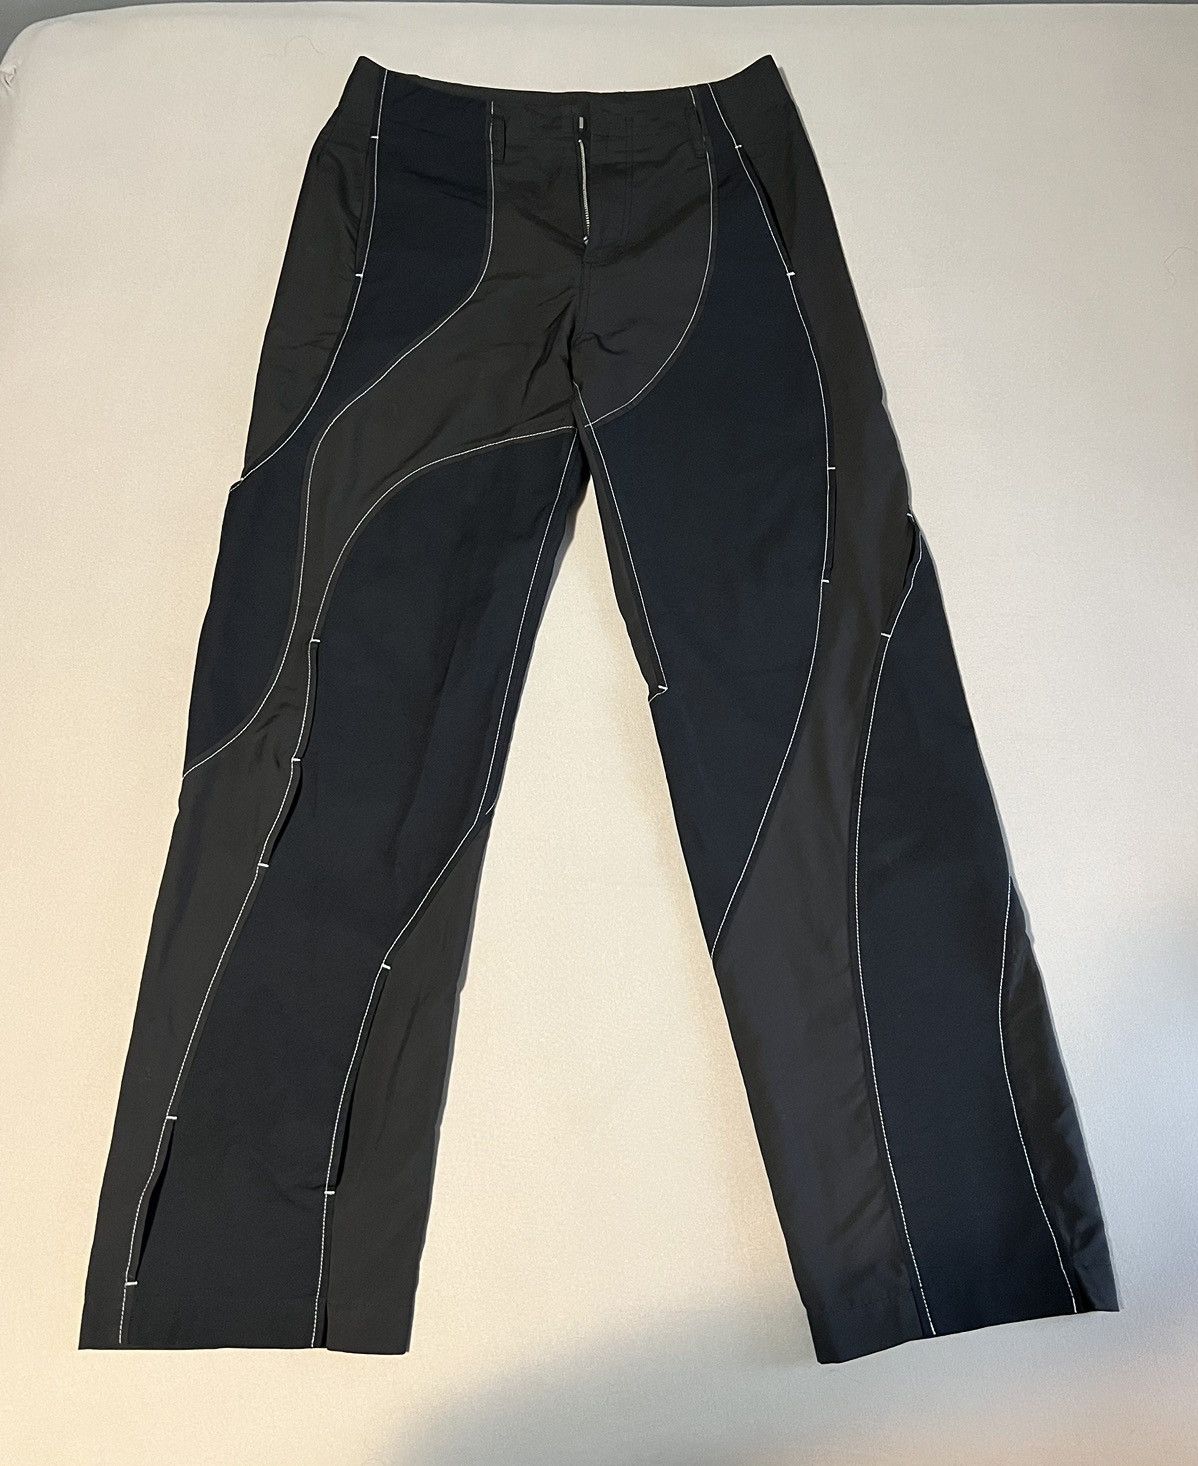 POST ARCHIVE FACTION (PAF) 3.0 TROUSERS LEFT (MULTI COLOR) | Grailed